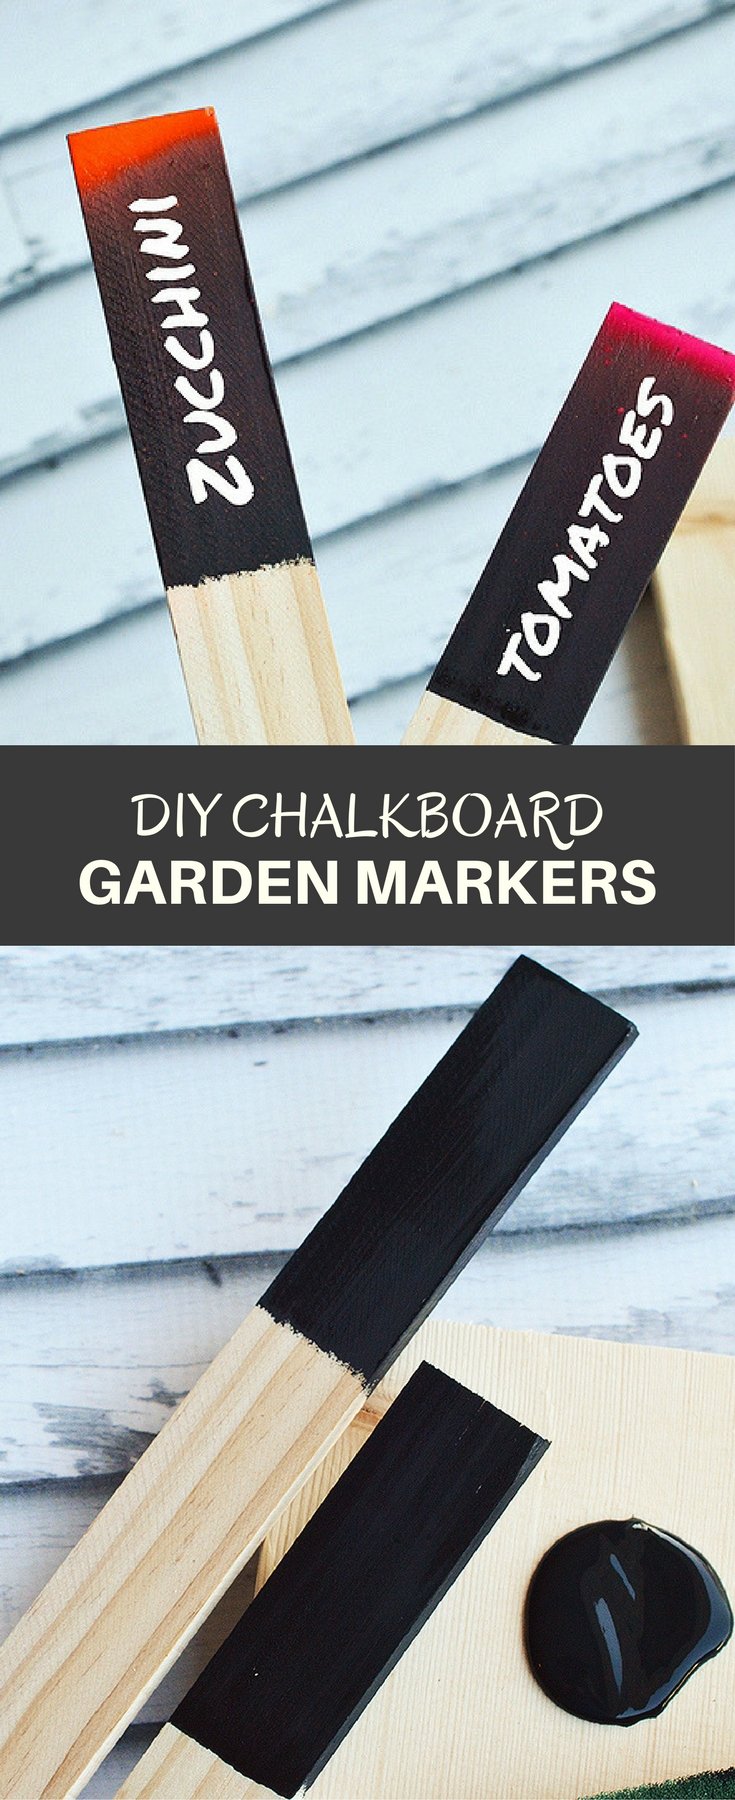 DIY Chalkboard Garden Markers make a cute addition to your garden! Made with sturdy wooden stakes and painted black chalkboard paint, they're reusable year after year!